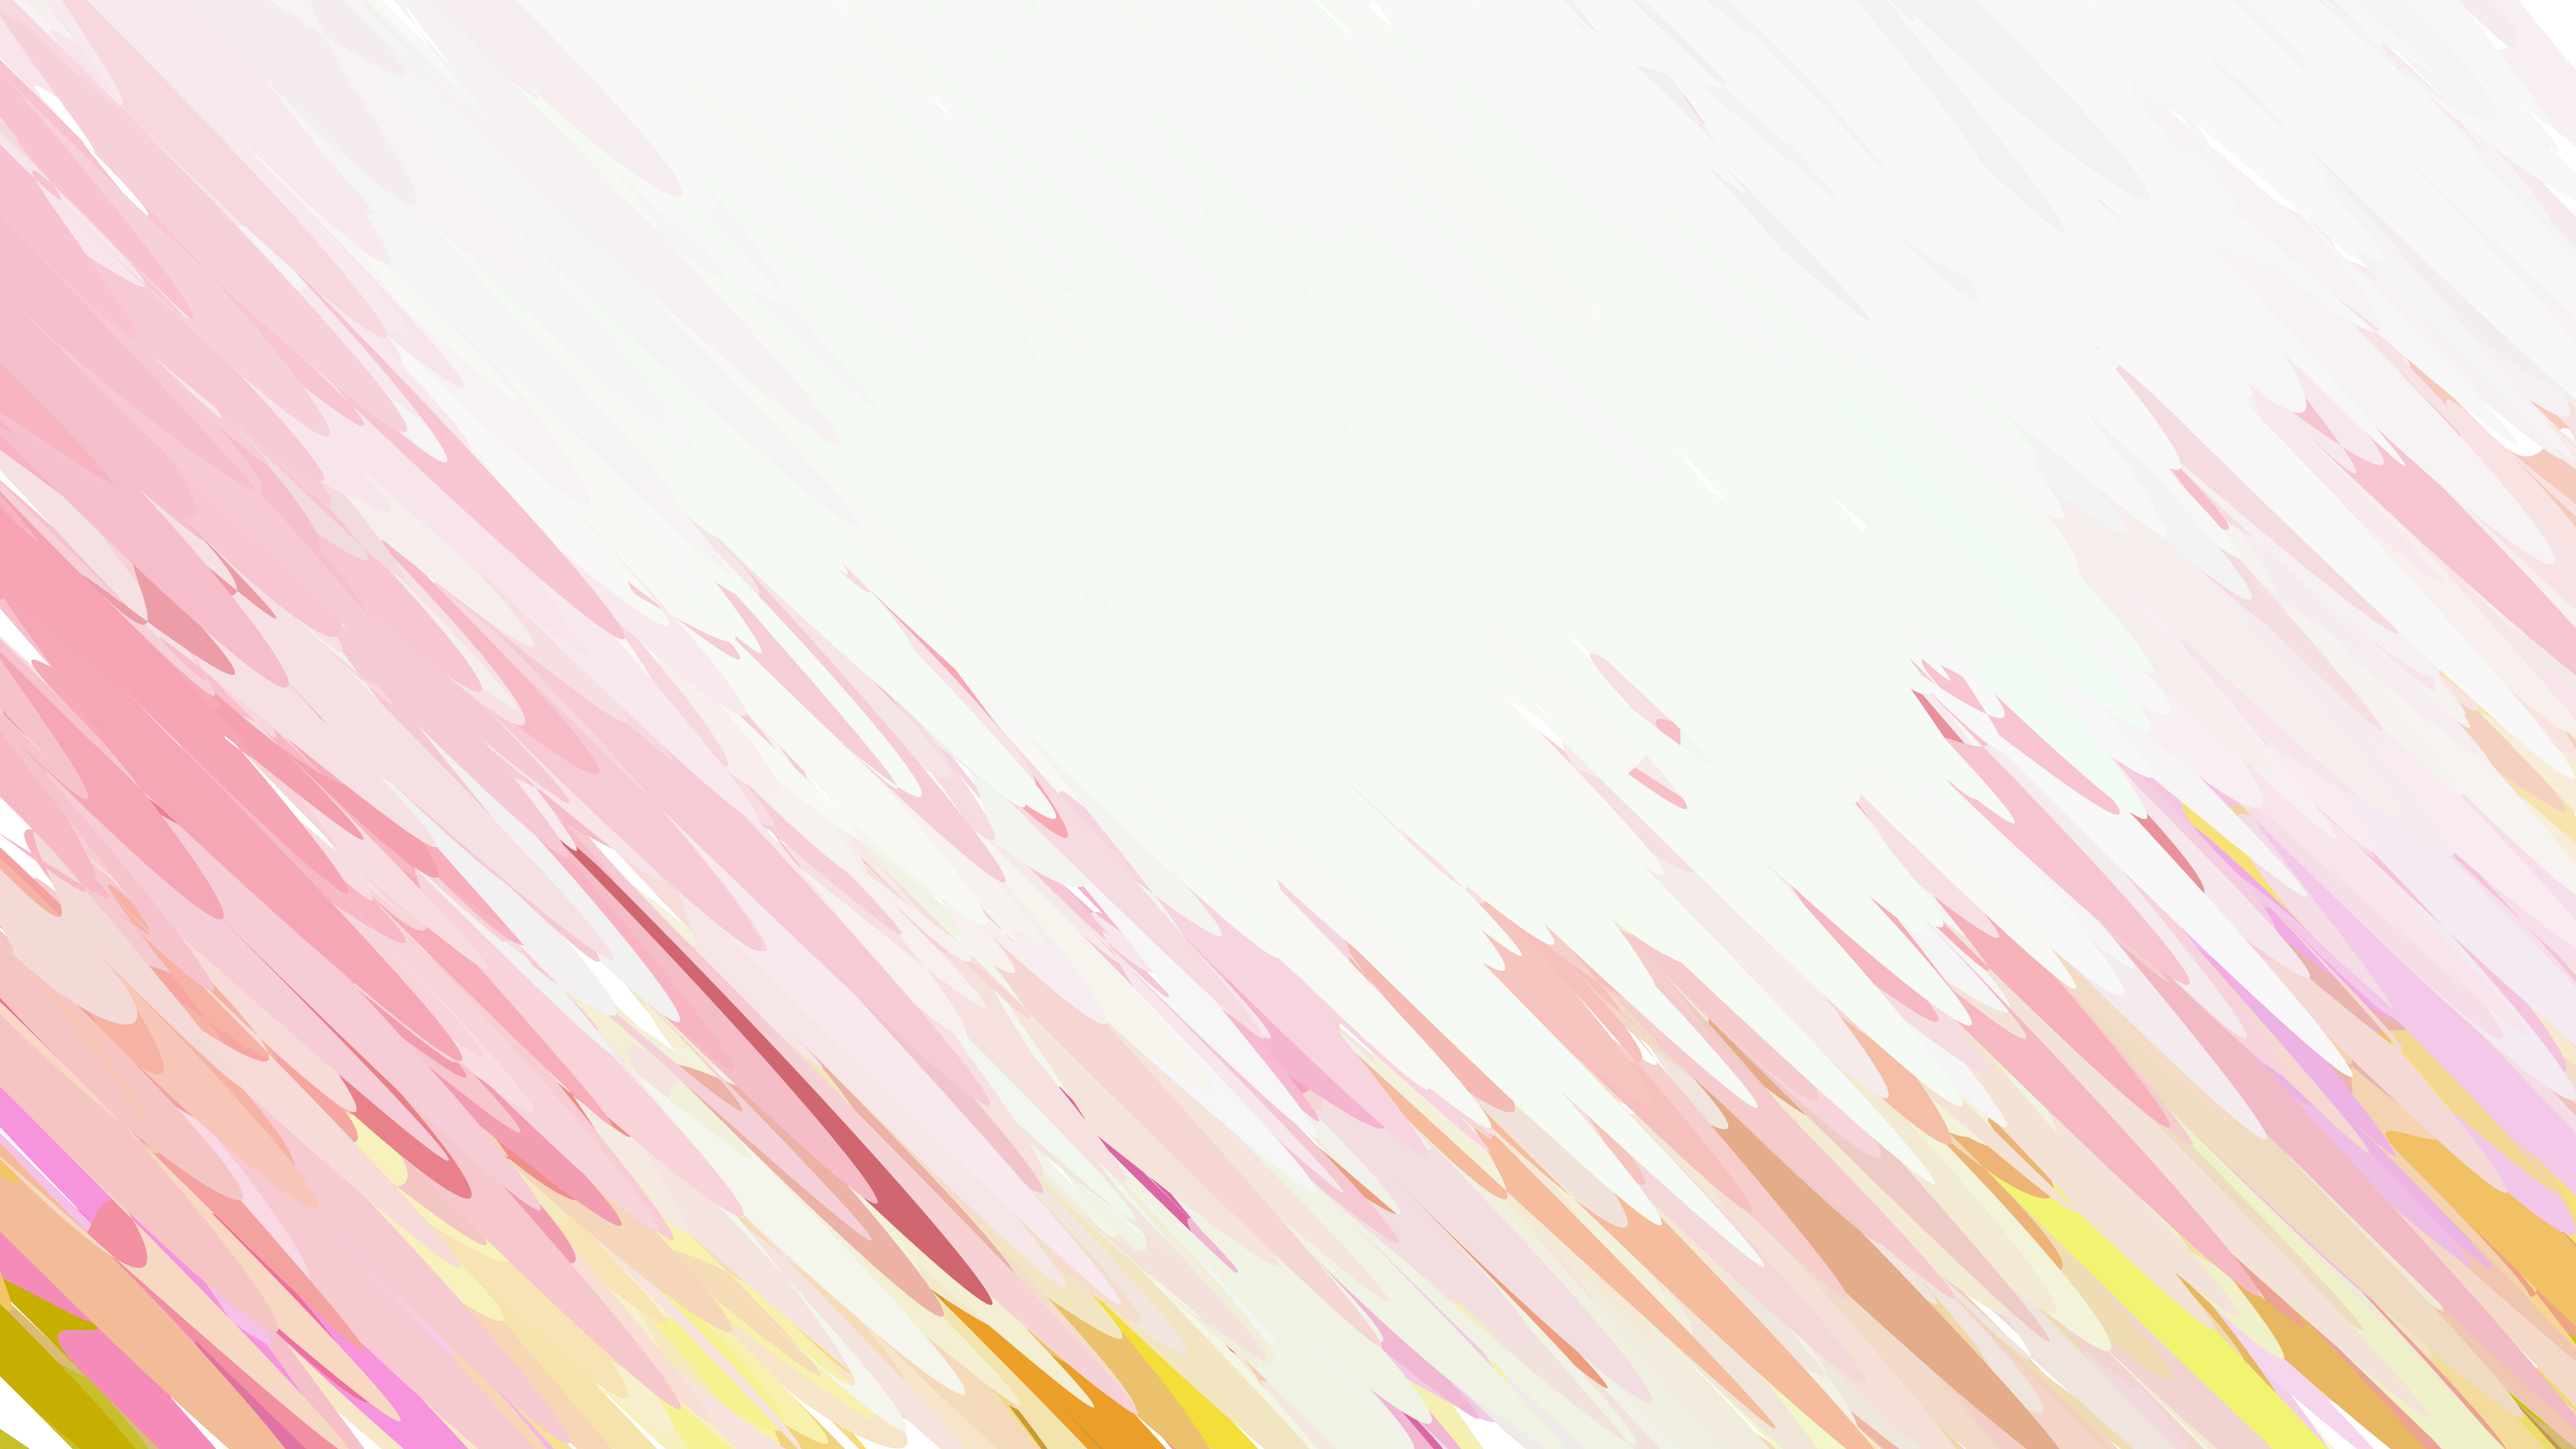 Free Pink Yellow and White Abstract Texture Background Design